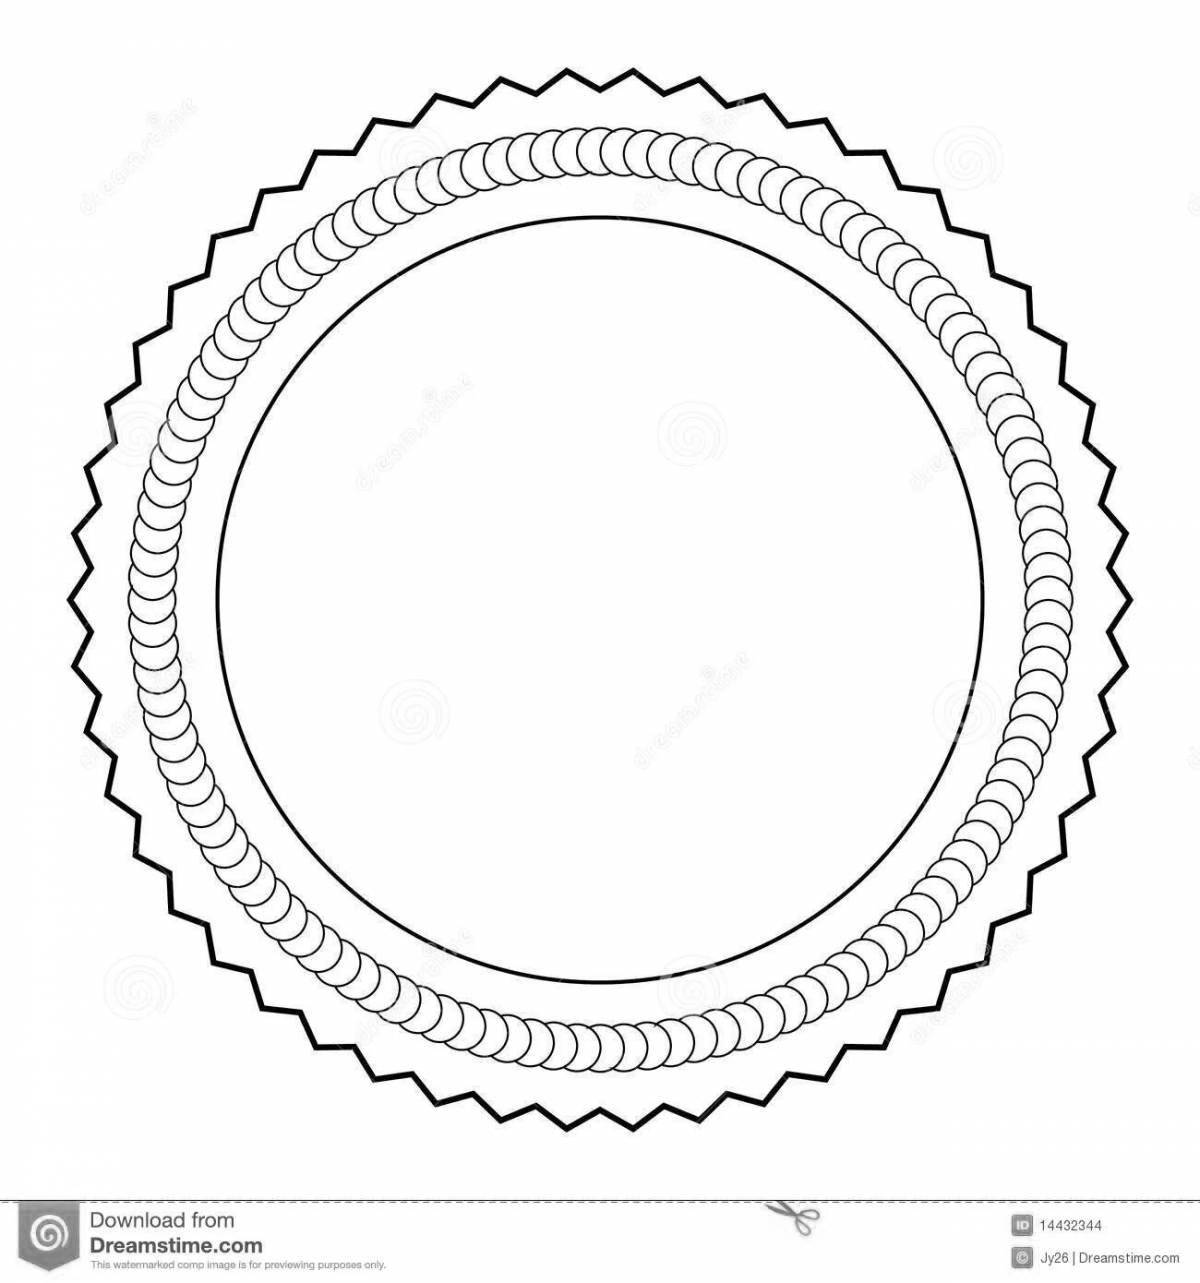 Merry medal coloring page